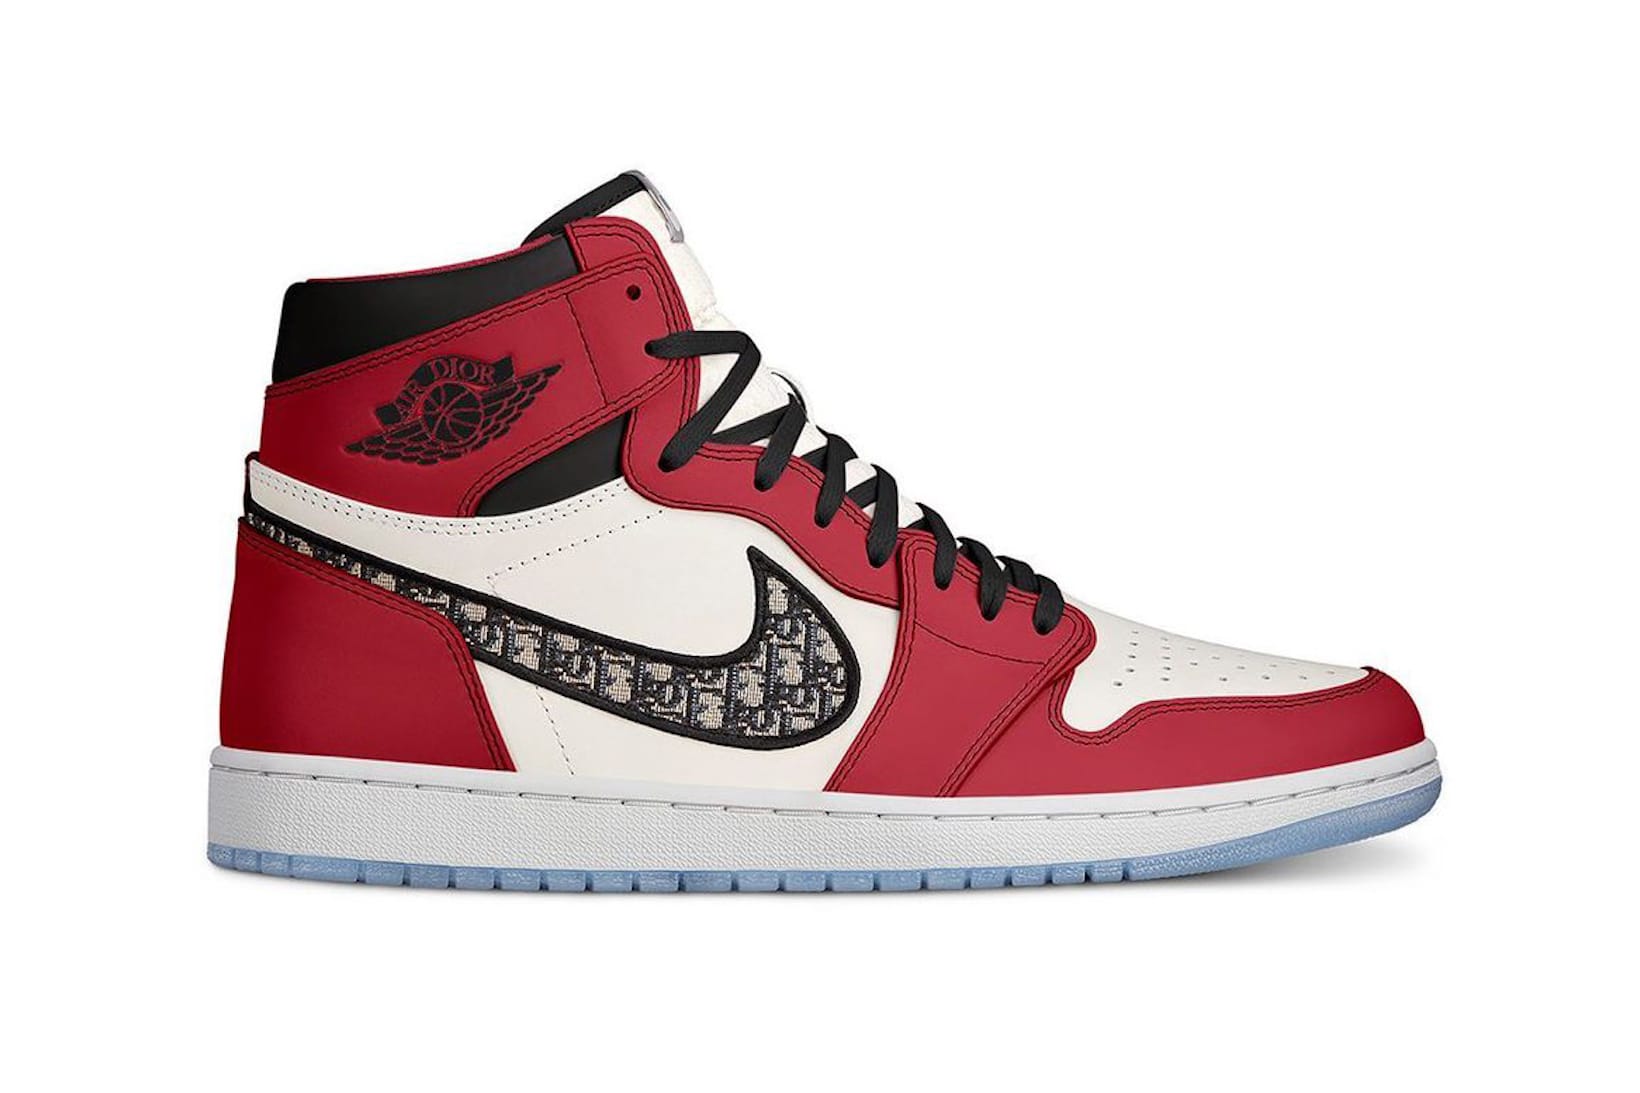 Nike Nike Air Jordan 1 High Dior  Size 12 Available For Immediate Sale At  Sothebys